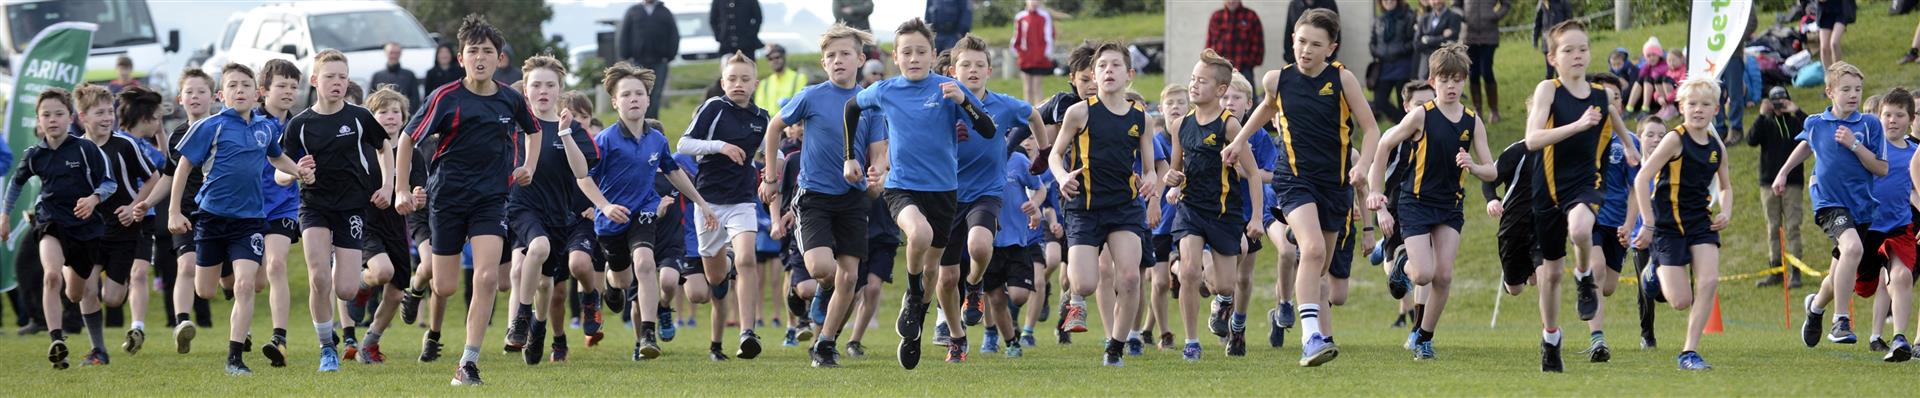 Runners take off from the start line of the boys year 5 and 6 race of the Ariki Cup at Kettle Park yesterday. Photos: Gerard O'Brien